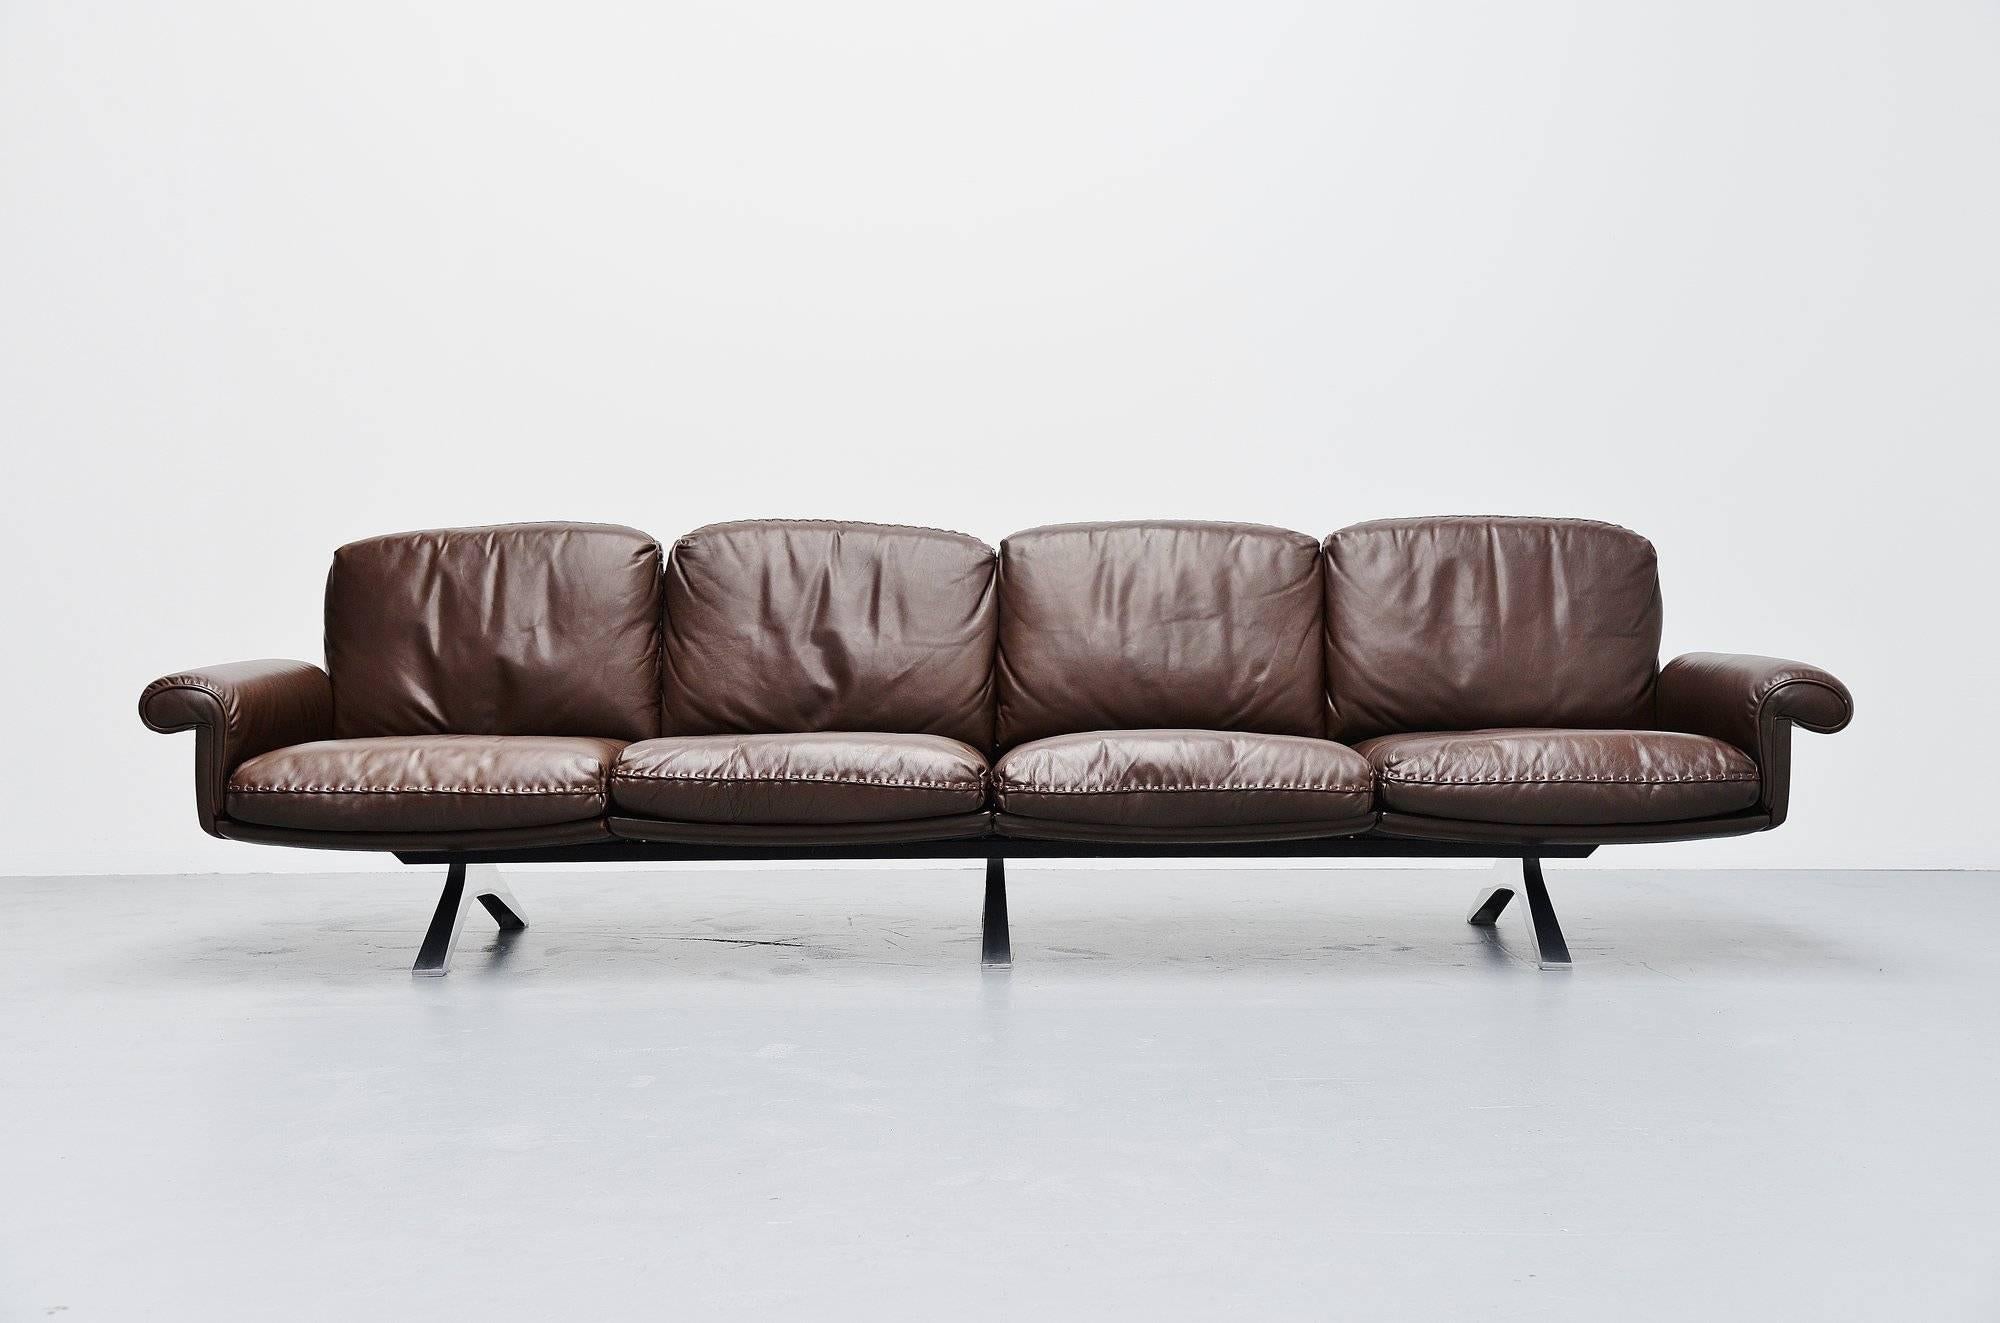 Dynamic lounge sofa designed and manufactured by De Sede, Switzerland, 1970. This sofa is model DS31/4 by De Sede and has chocolate brown leather seat with nicely stitched finished cushions. The legs are made of polished aluminium. De Sede is known